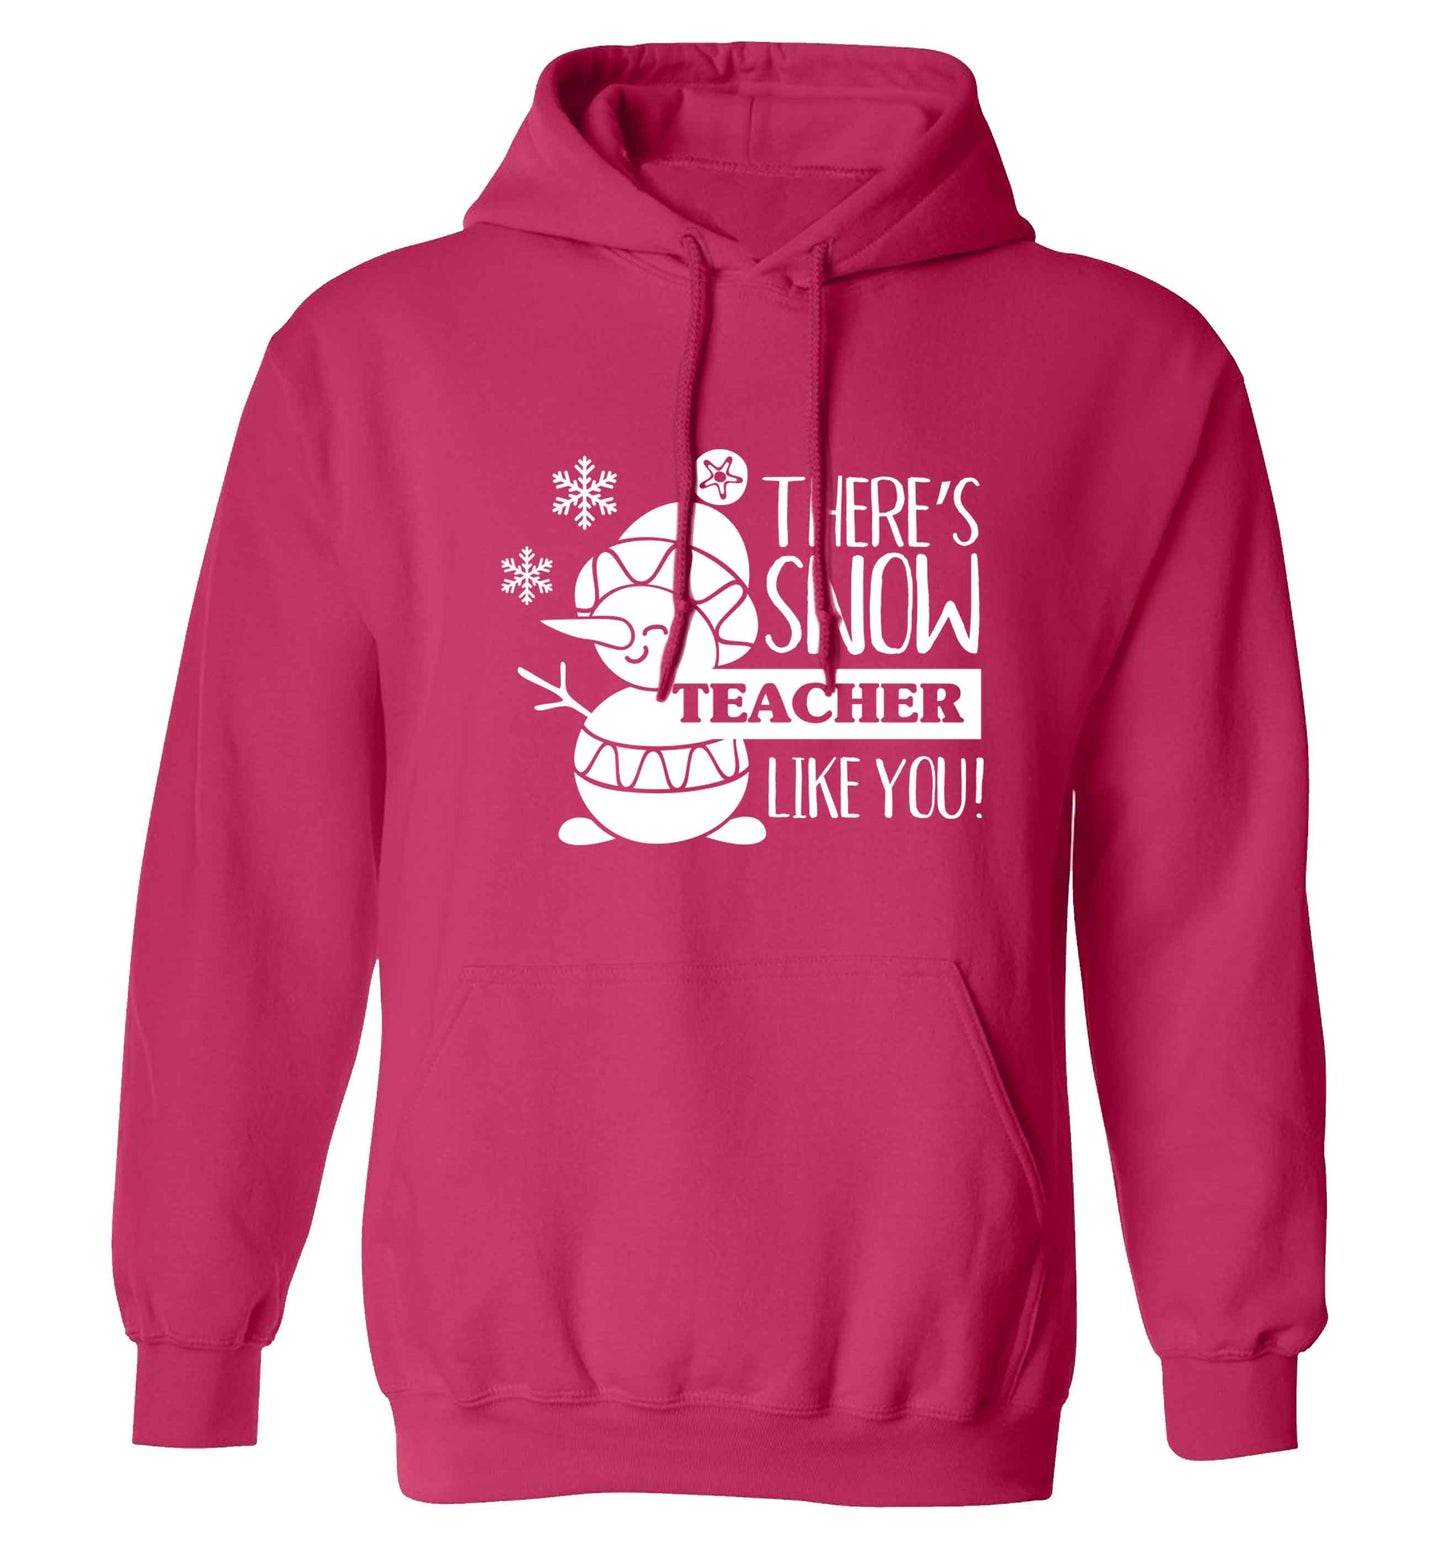 There's snow teacher like you adults unisex pink hoodie 2XL